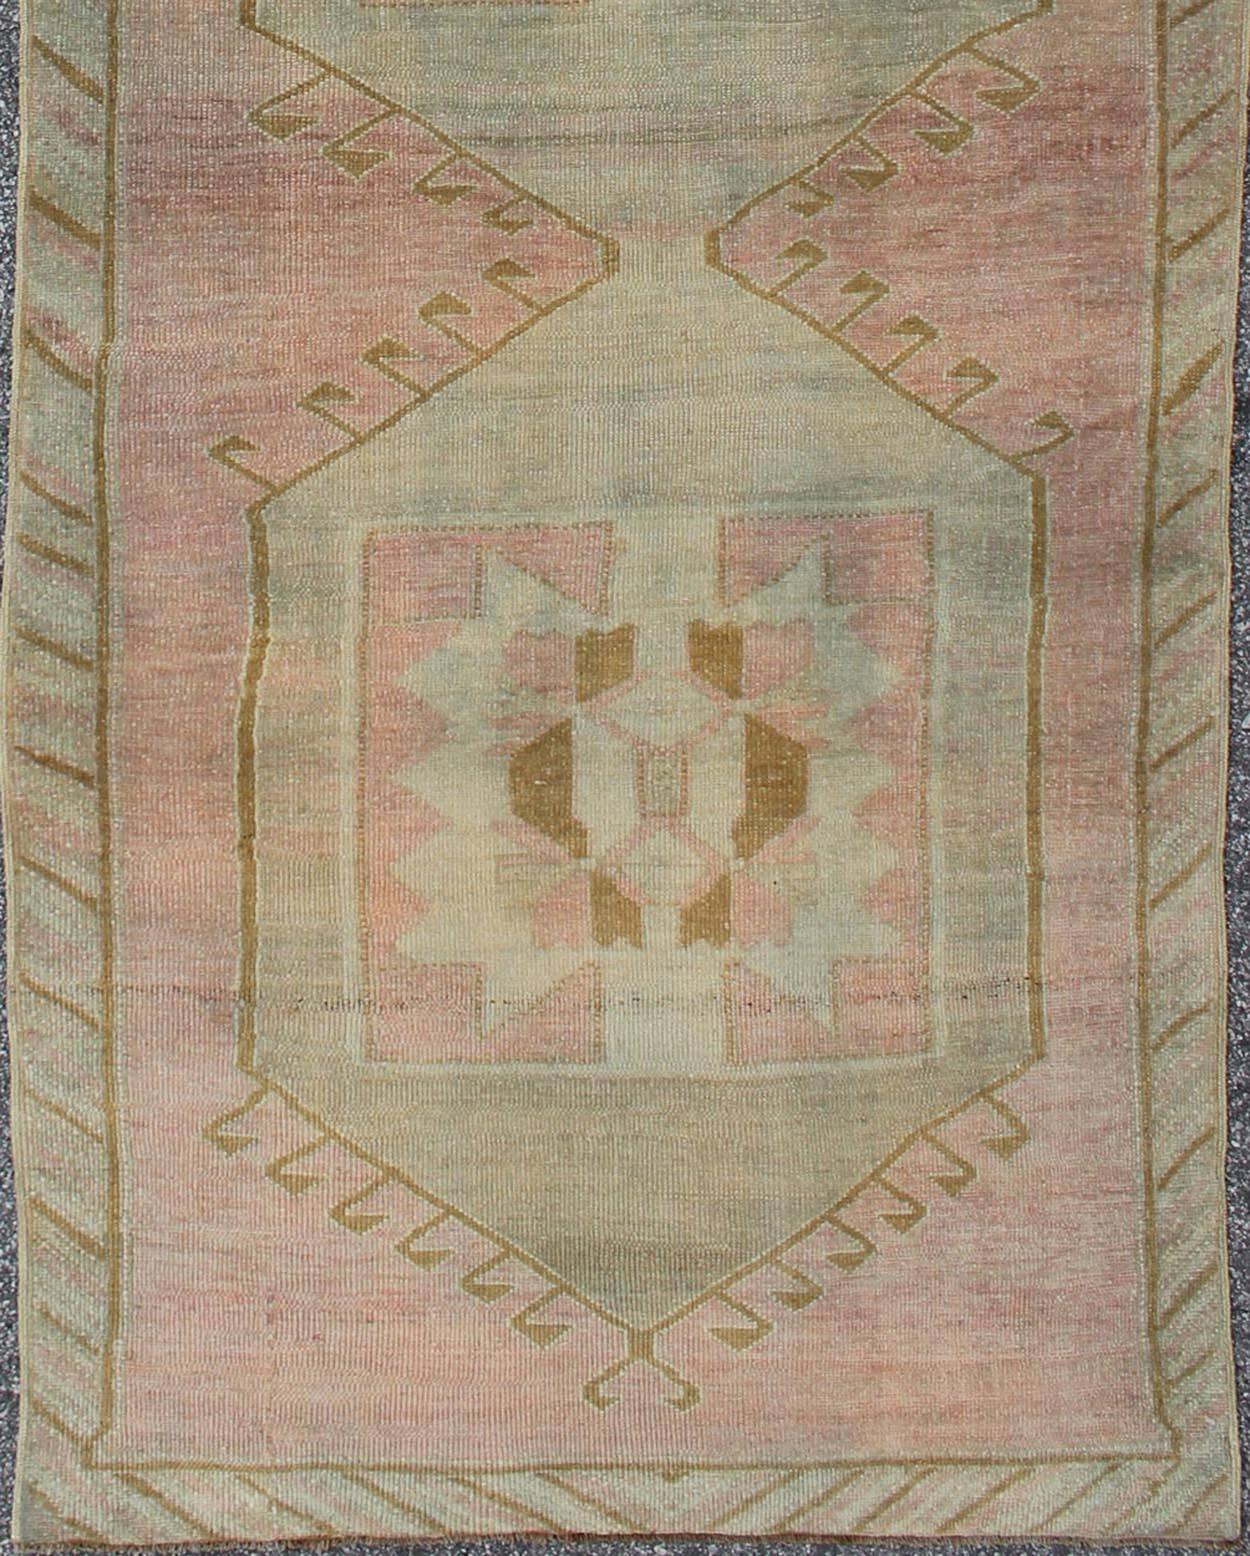 This unique Oushak runner features a geometric pattern inspired by tribal design. The unique tribal motifs, coupled with pink and light blue hues, culminate in a highly decorative and richly intricate piece. 
Measures: 3'8 x 11'6.